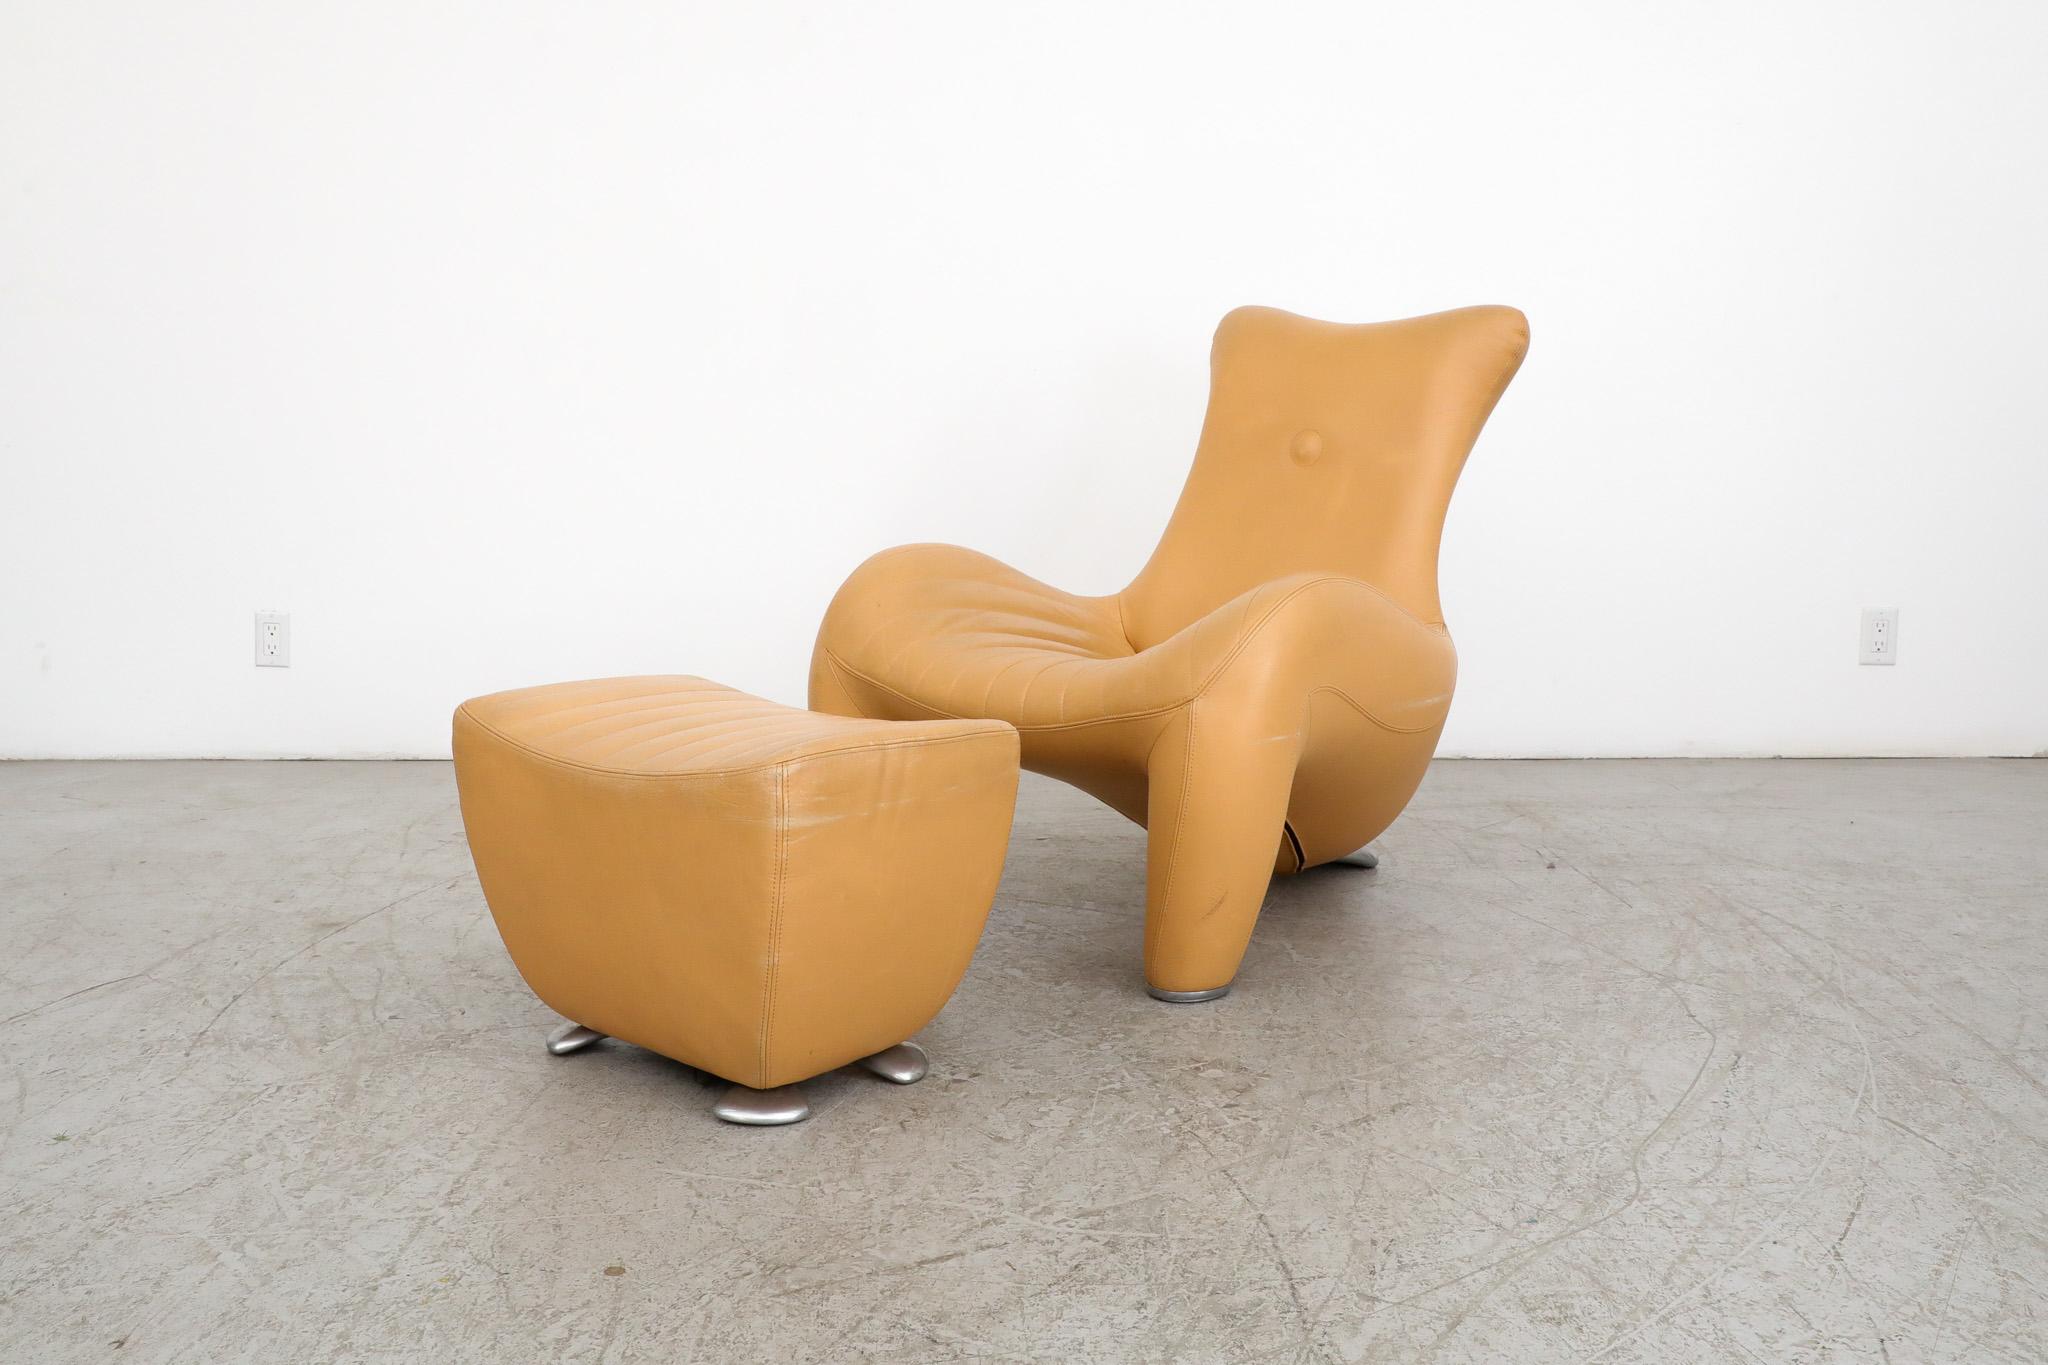 Beautiful 'Balou' lounge chair with ottoman in a sand-colored leather with brushed aluminum feet by Jane Worthington for Leolux. Jane Worthington (1969, UK) graduated from the prestigious De Monfort University in 1990 and moved to the Netherlands to